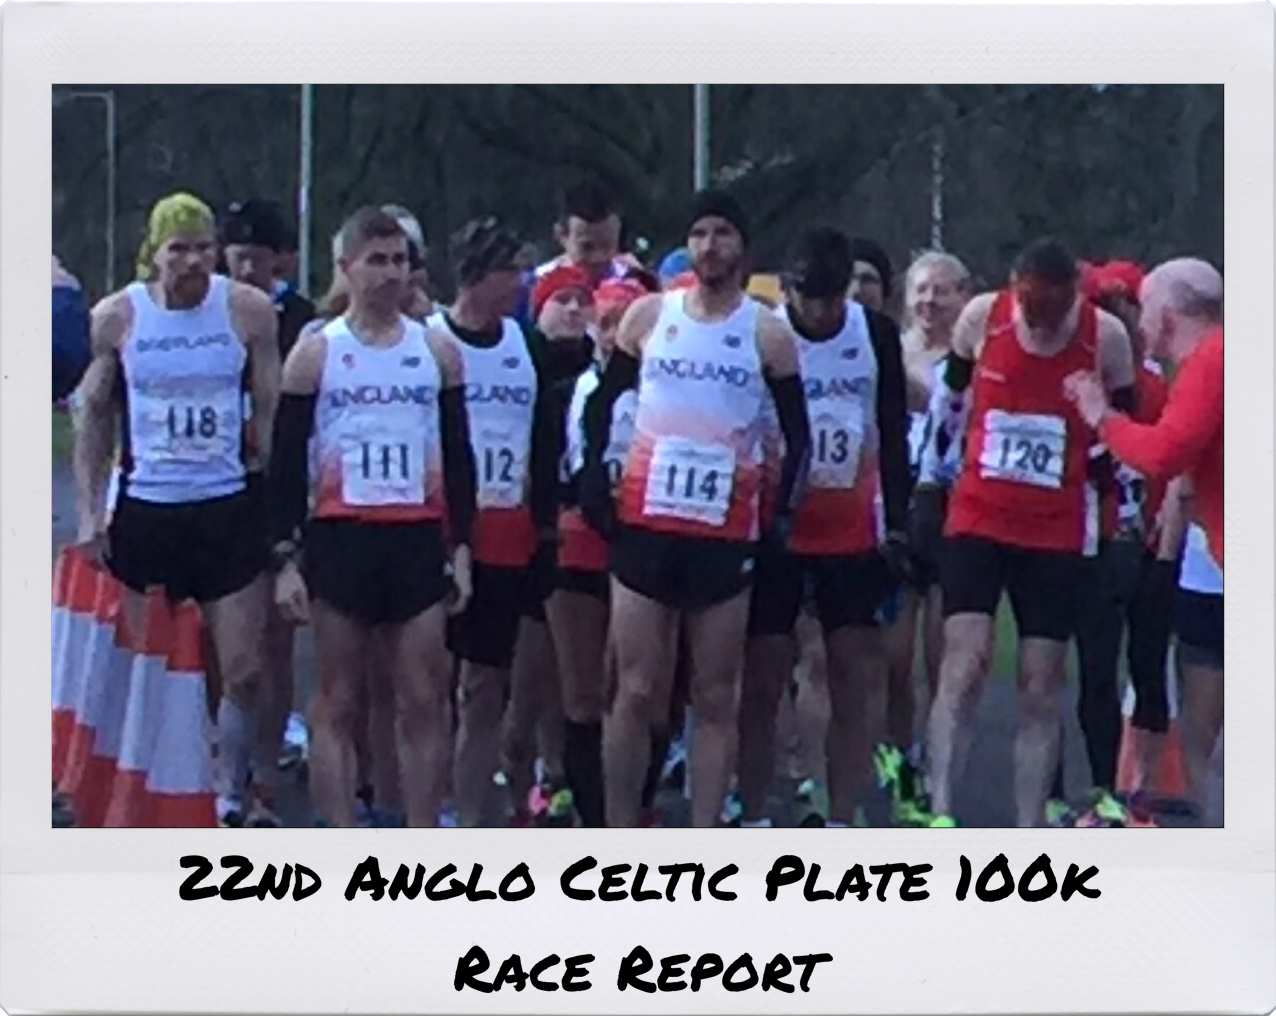 22nd Anglo Celtic Plate 100k. Perth, Scotland - Race Report by @fragilerunner